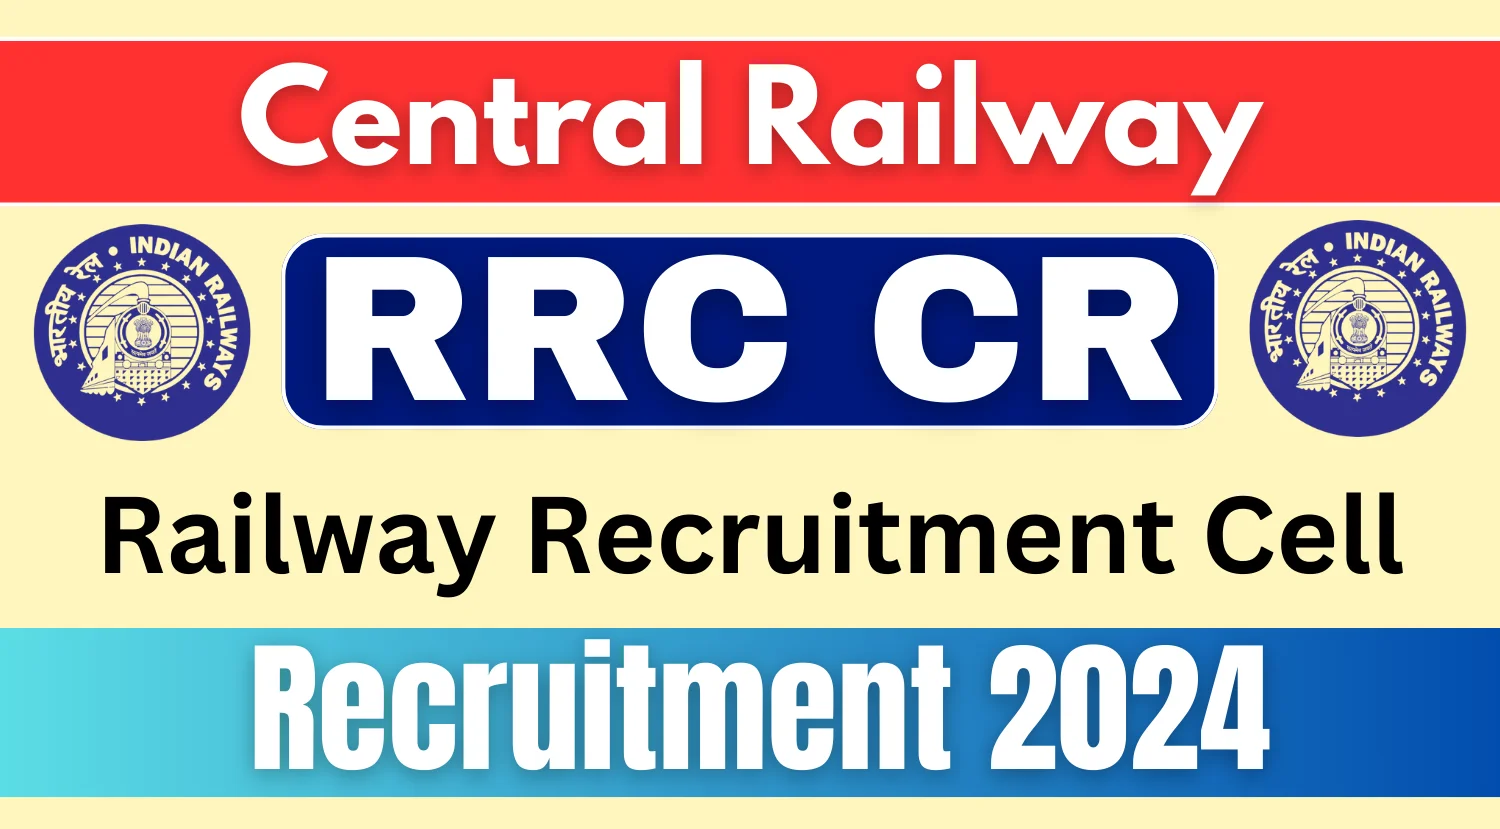 RRC CR Recruitment 2024 Notification Released for 2424